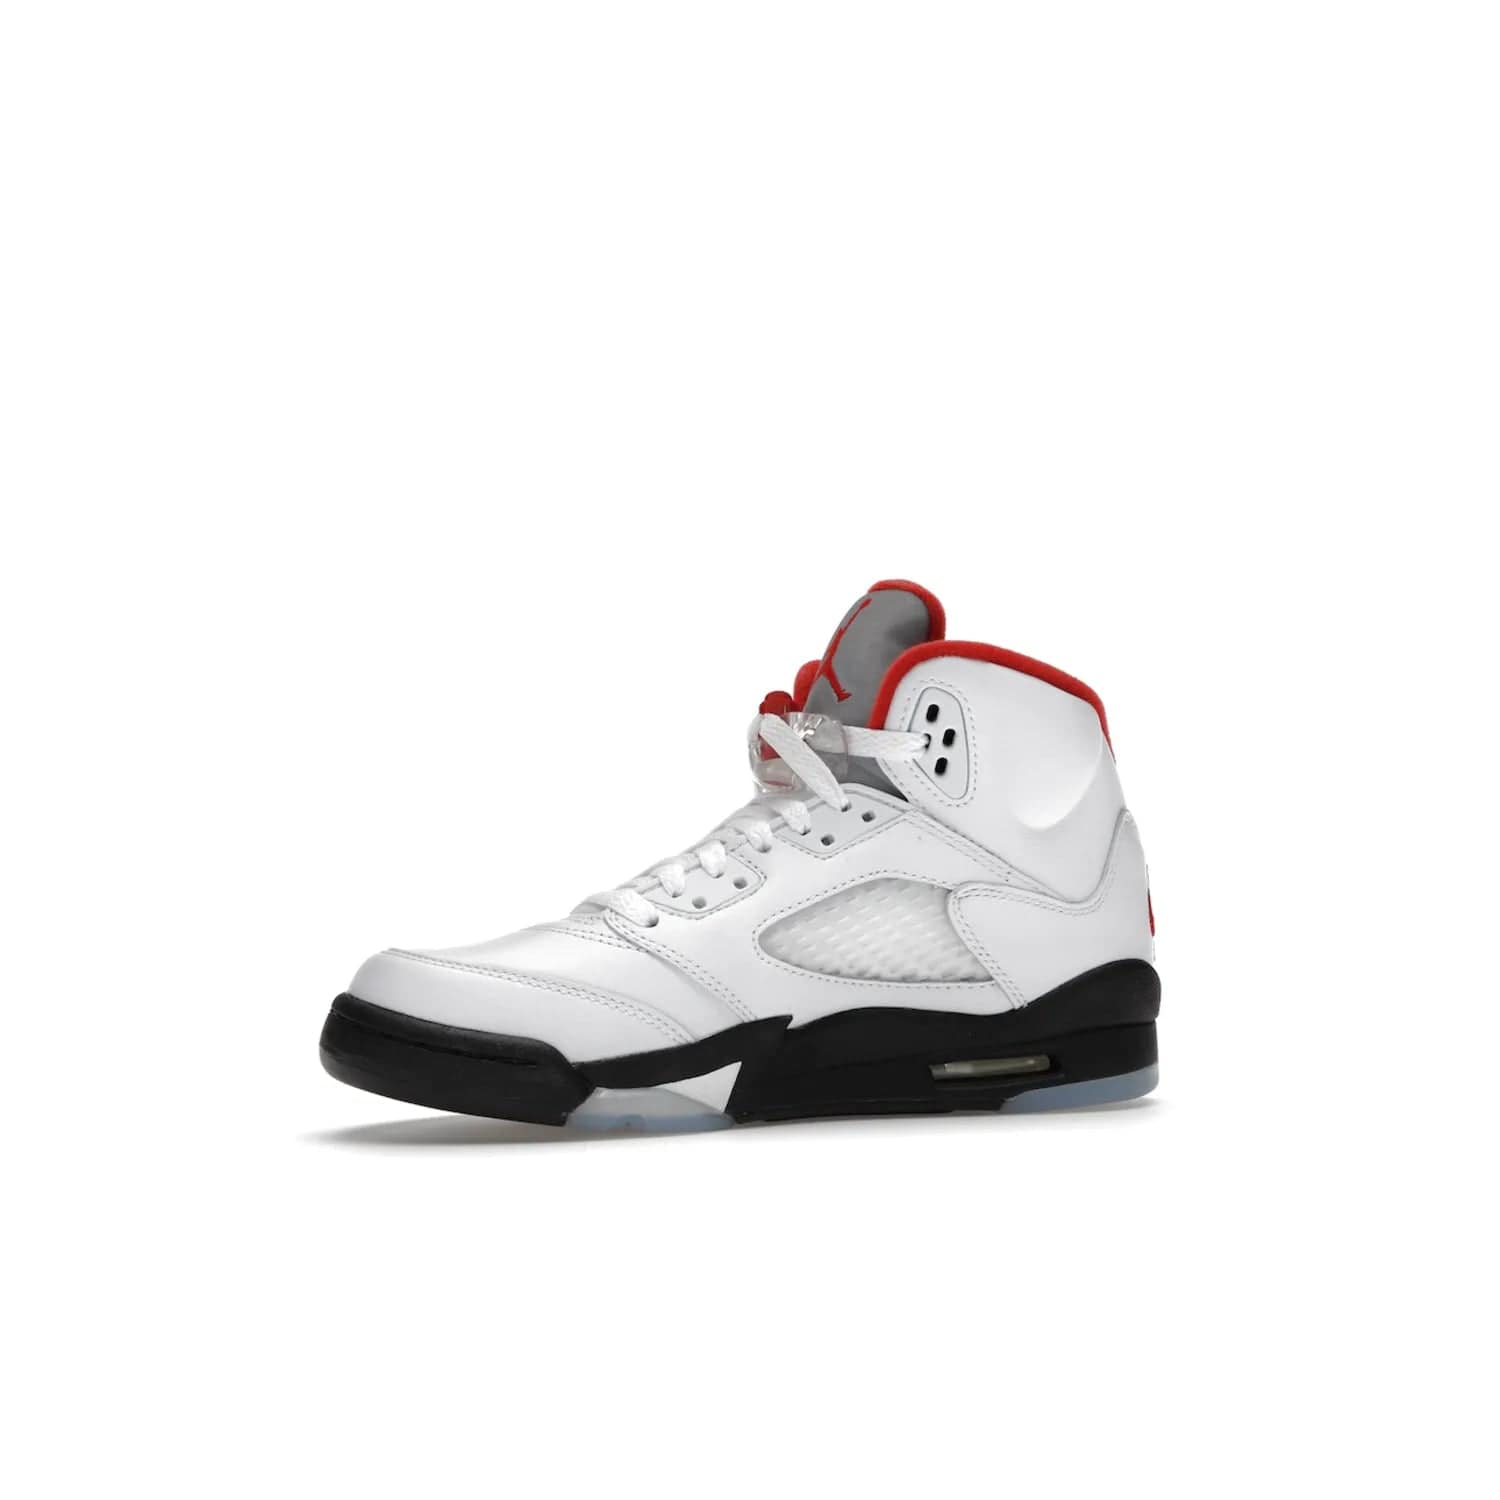 Jordan 5 Retro Fire Red Silver Tongue (2020) (GS) - Image 17 - Only at www.BallersClubKickz.com - A stylish option for any grade schooler. The Air Jordan 5 Retro Fire Red Silver Tongue 2020 GS features a combination of four hues, premium white leather, a clear mesh mid-upper and a reflective silver tongue. An icy translucent blue outsole completes the look. Available on May 2, $150.